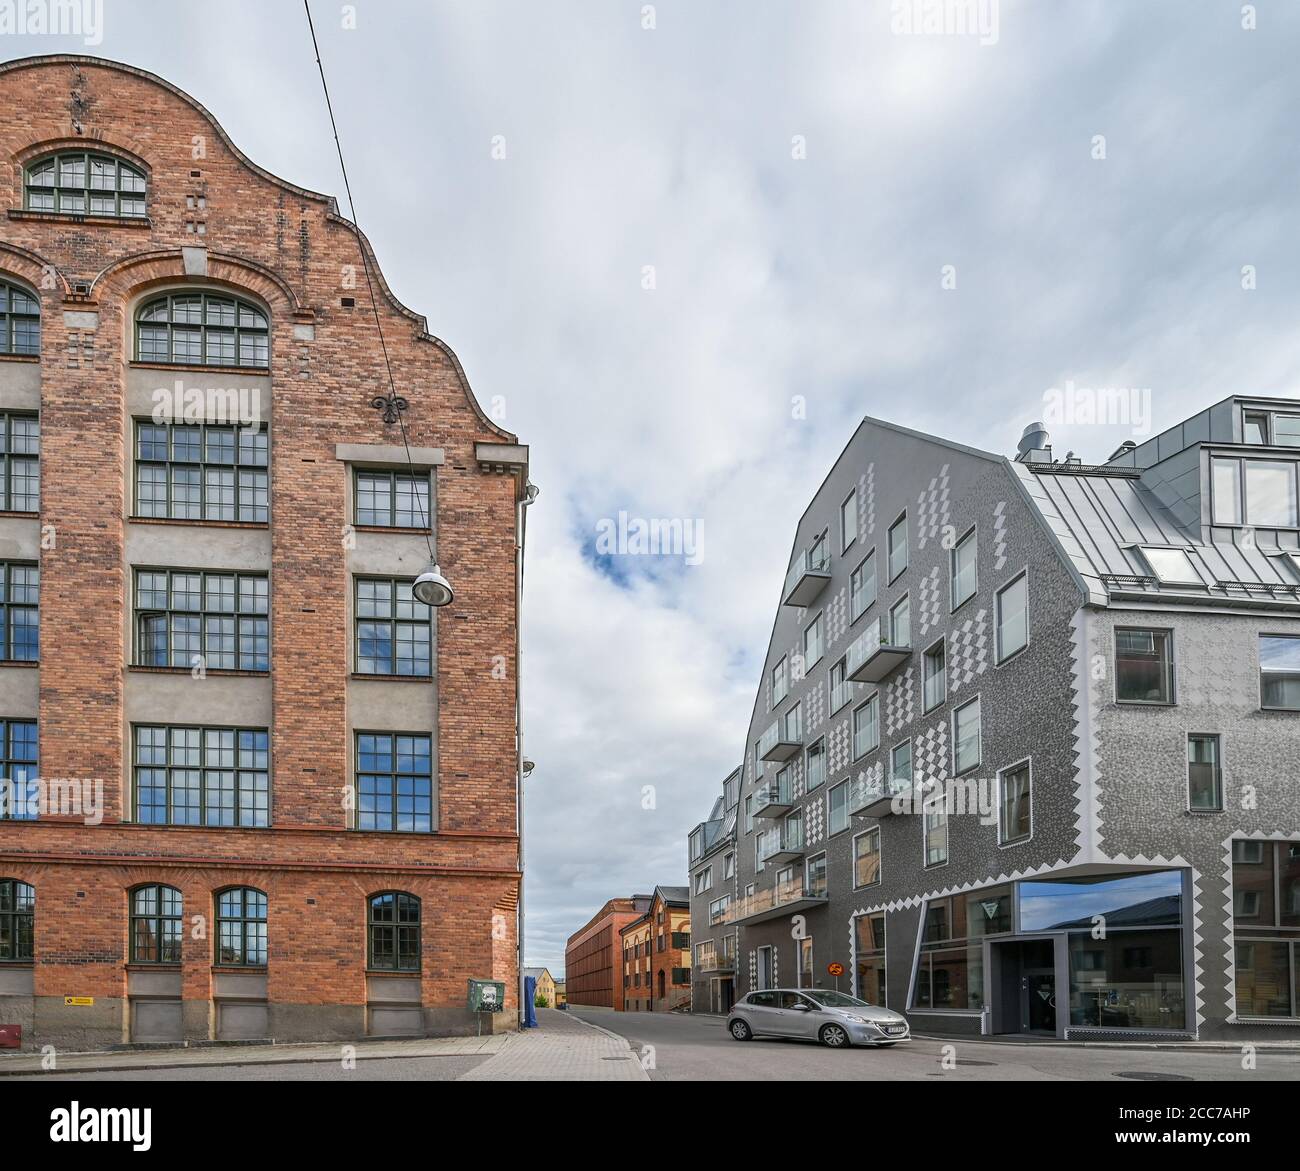 Garvaren is modern residential dbuilding in the industrial landscape of Norrkoping. The factory buildings have also been redeveloped into condos. Stock Photo